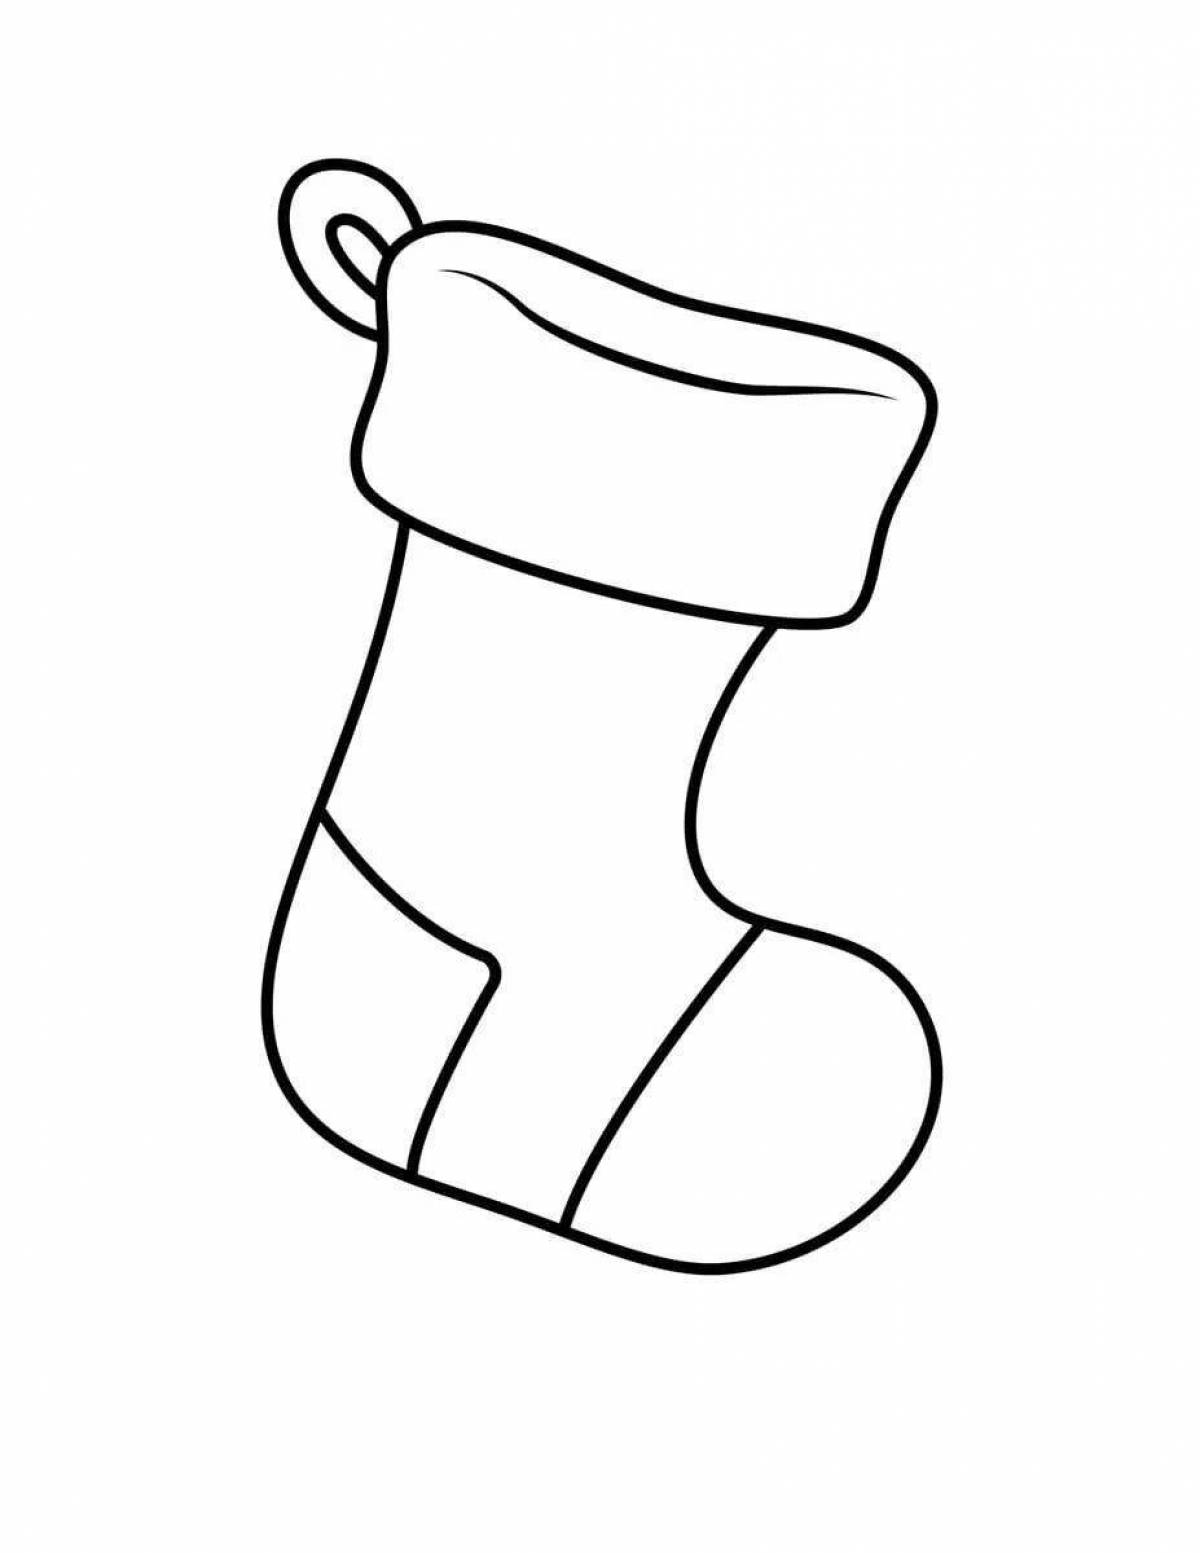 Coloring page funny boots